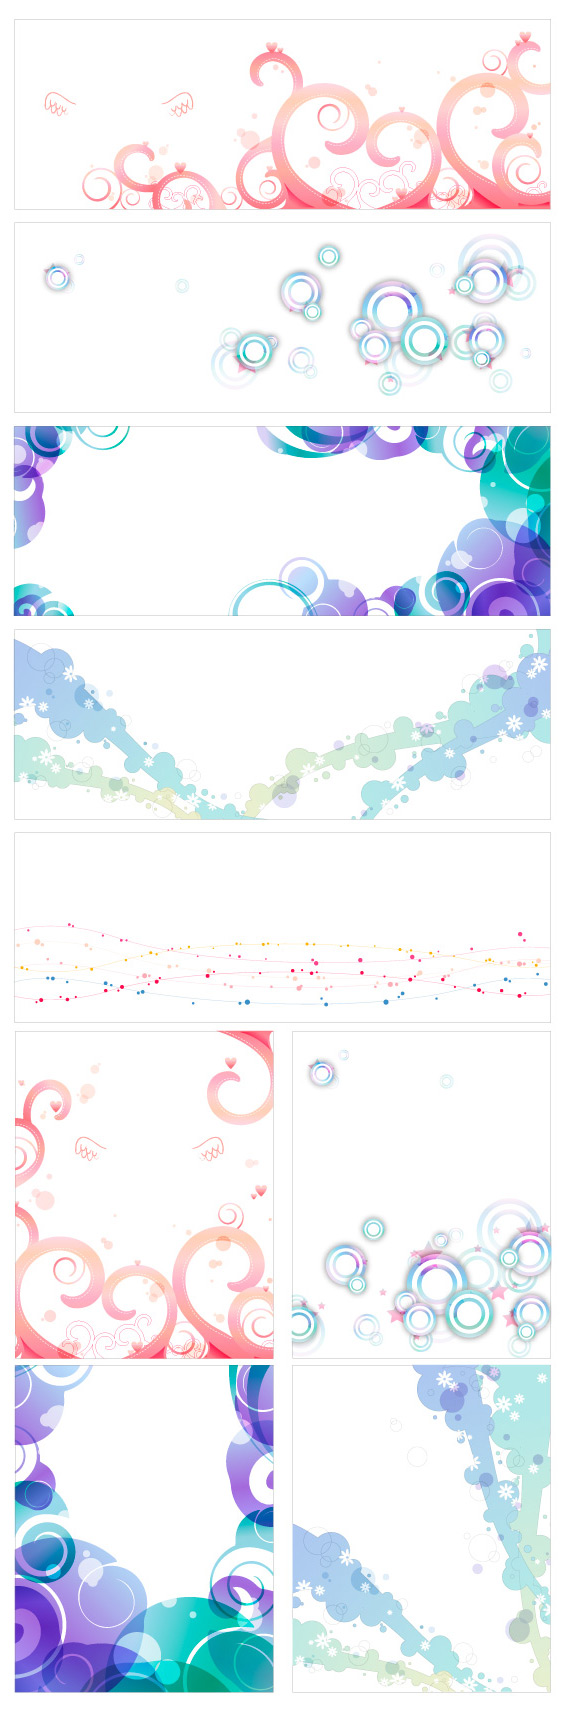 Watercolor pattern background